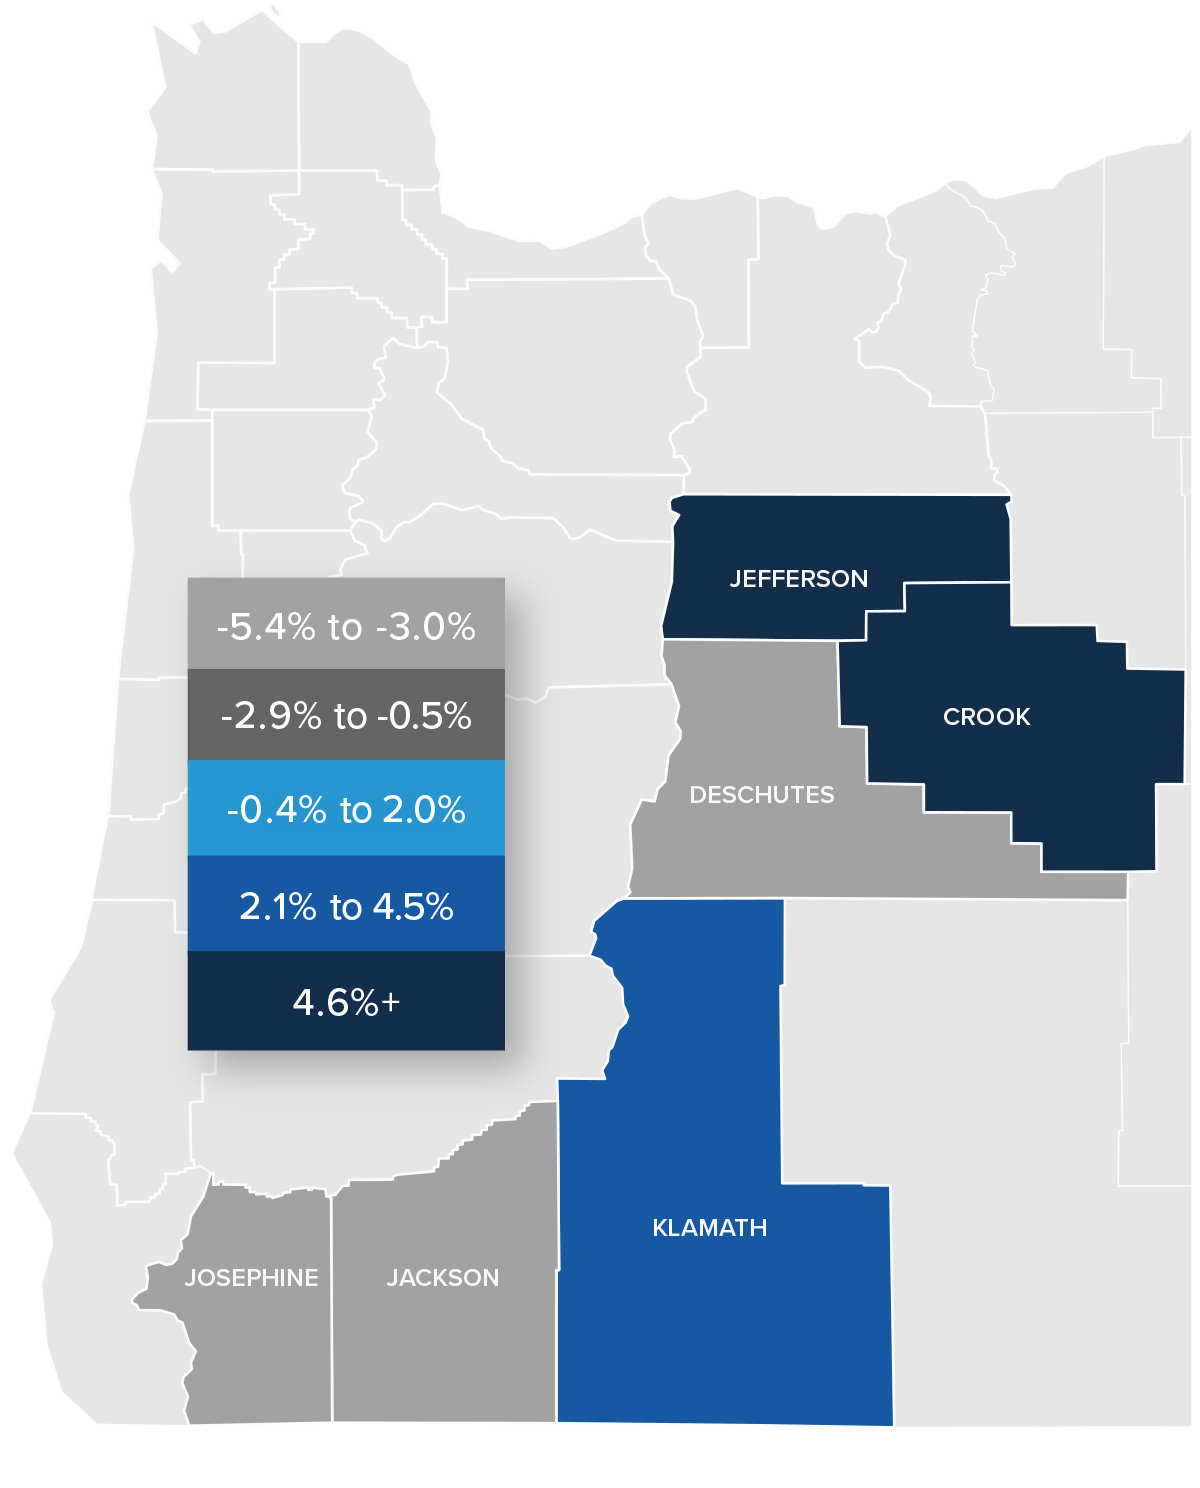 A map showing the real estate home prices percentage changes for various counties in Central and Southern Oregon. Different colors correspond to different tiers of percentage change. Deschutes, Jackson, and Josephine counties have a percentage change in the -5.4% to -3% range. Klamath County is in the 2.1% to 4.5% change range. Jefferson and Crook Counties are in the 4.6%+ change range.